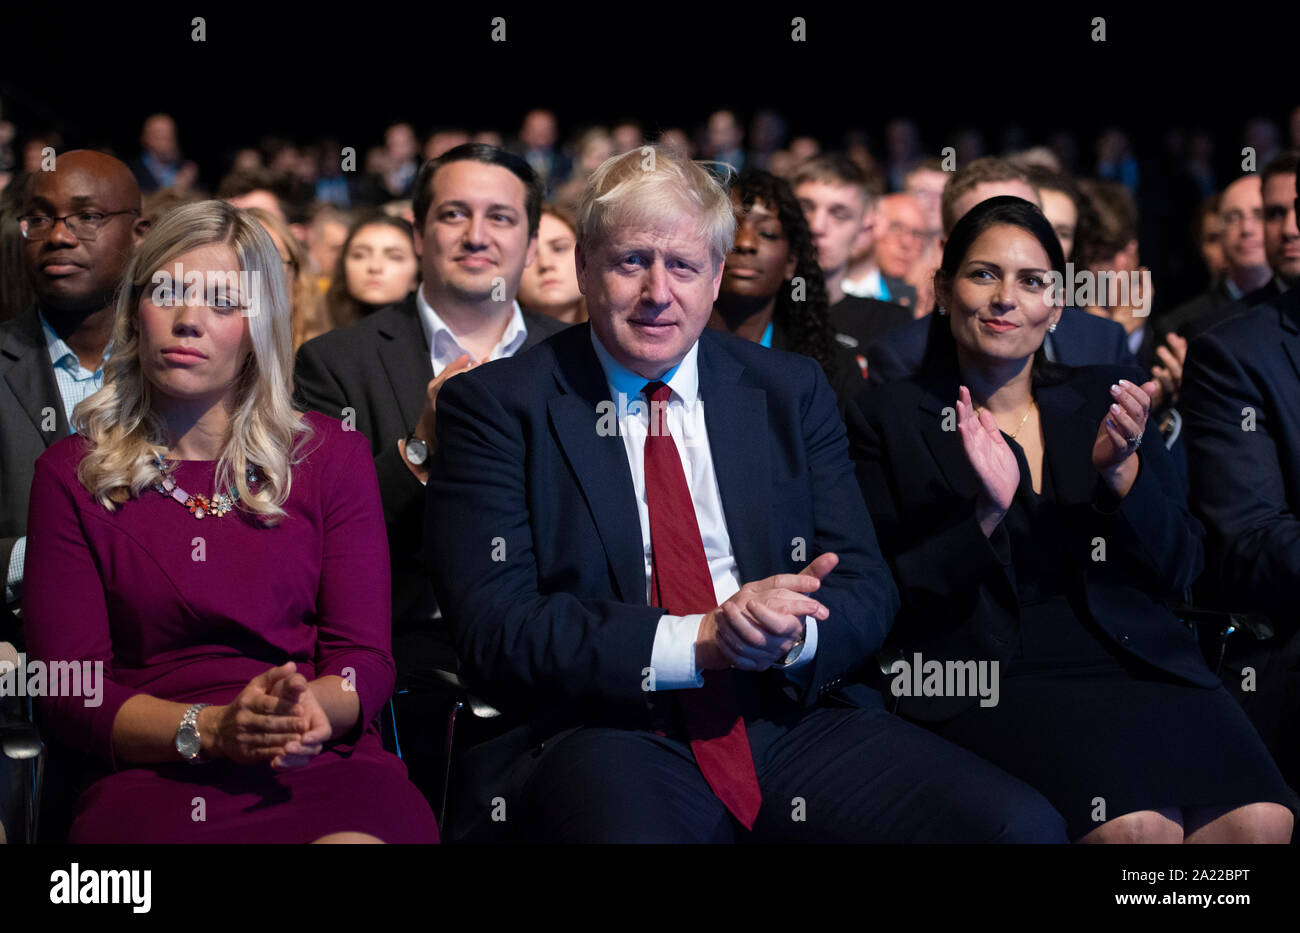 Manchester, UK. 30th September 2019. Boris Johnson, Prime Minister, First Lord of the Treasury, Minister for the Civil Service and MP for Uxbridge and South Ruislip, attends day two of the Conservative Party Conference in Manchester. © Russell Hart/Alamy Live News. Stock Photo